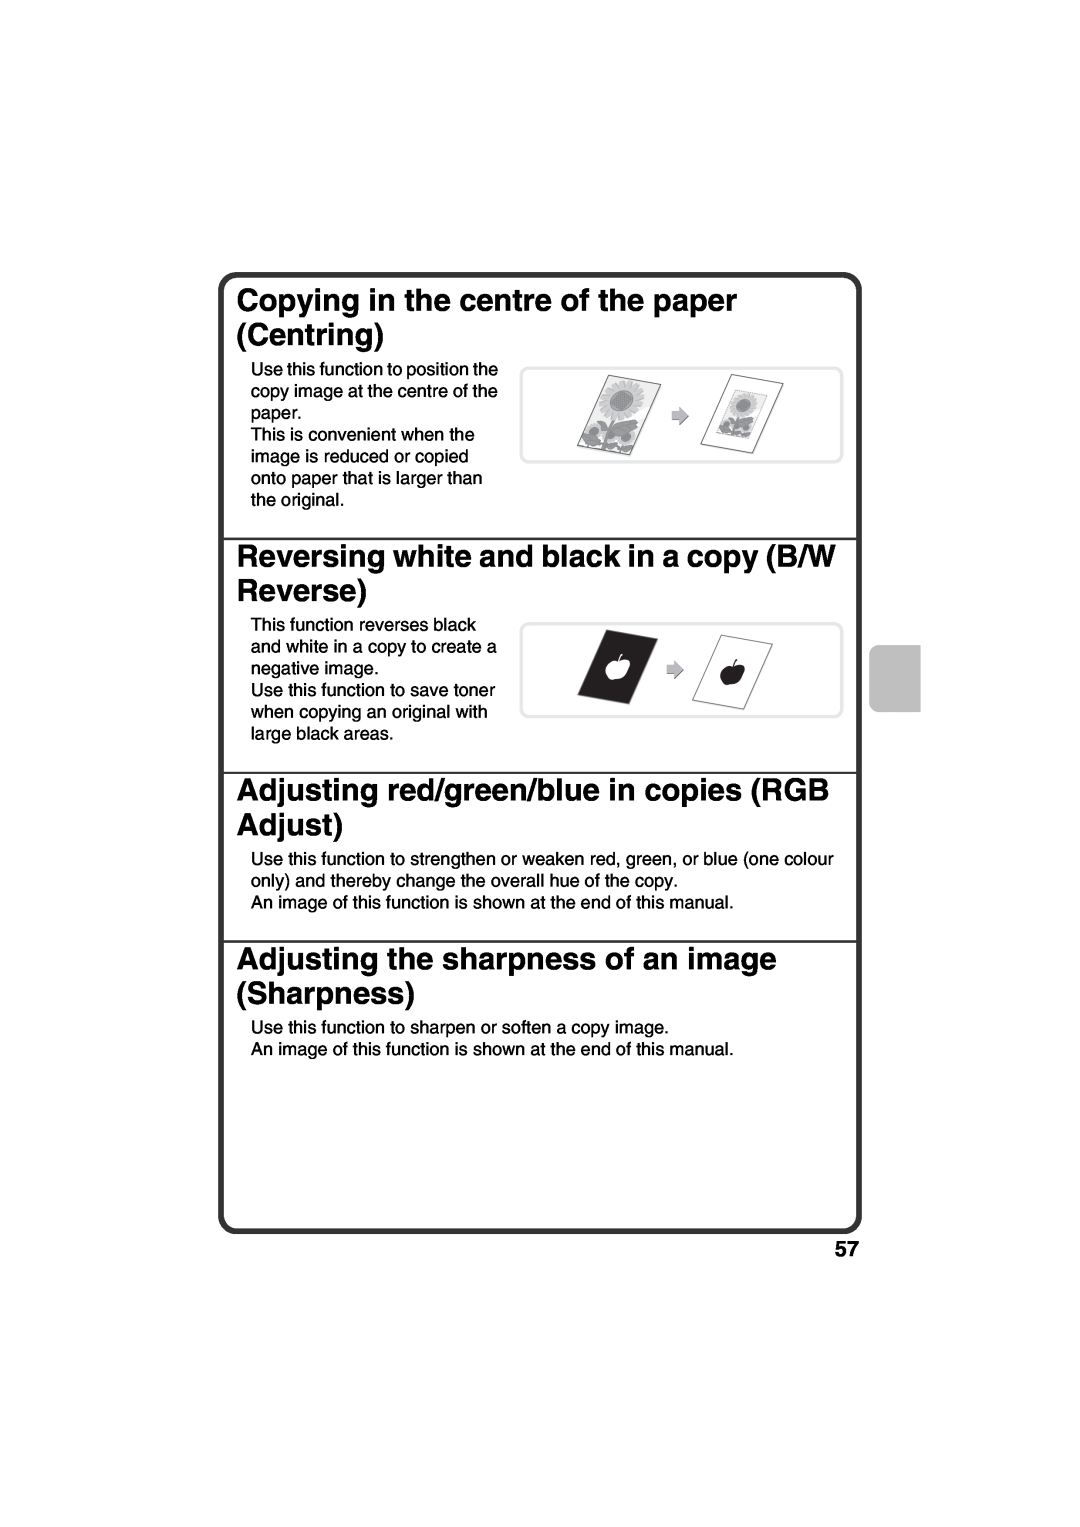 Sharp MX-C381, MX-C311 Copying in the centre of the paper Centring, Reversing white and black in a copy B/W Reverse 